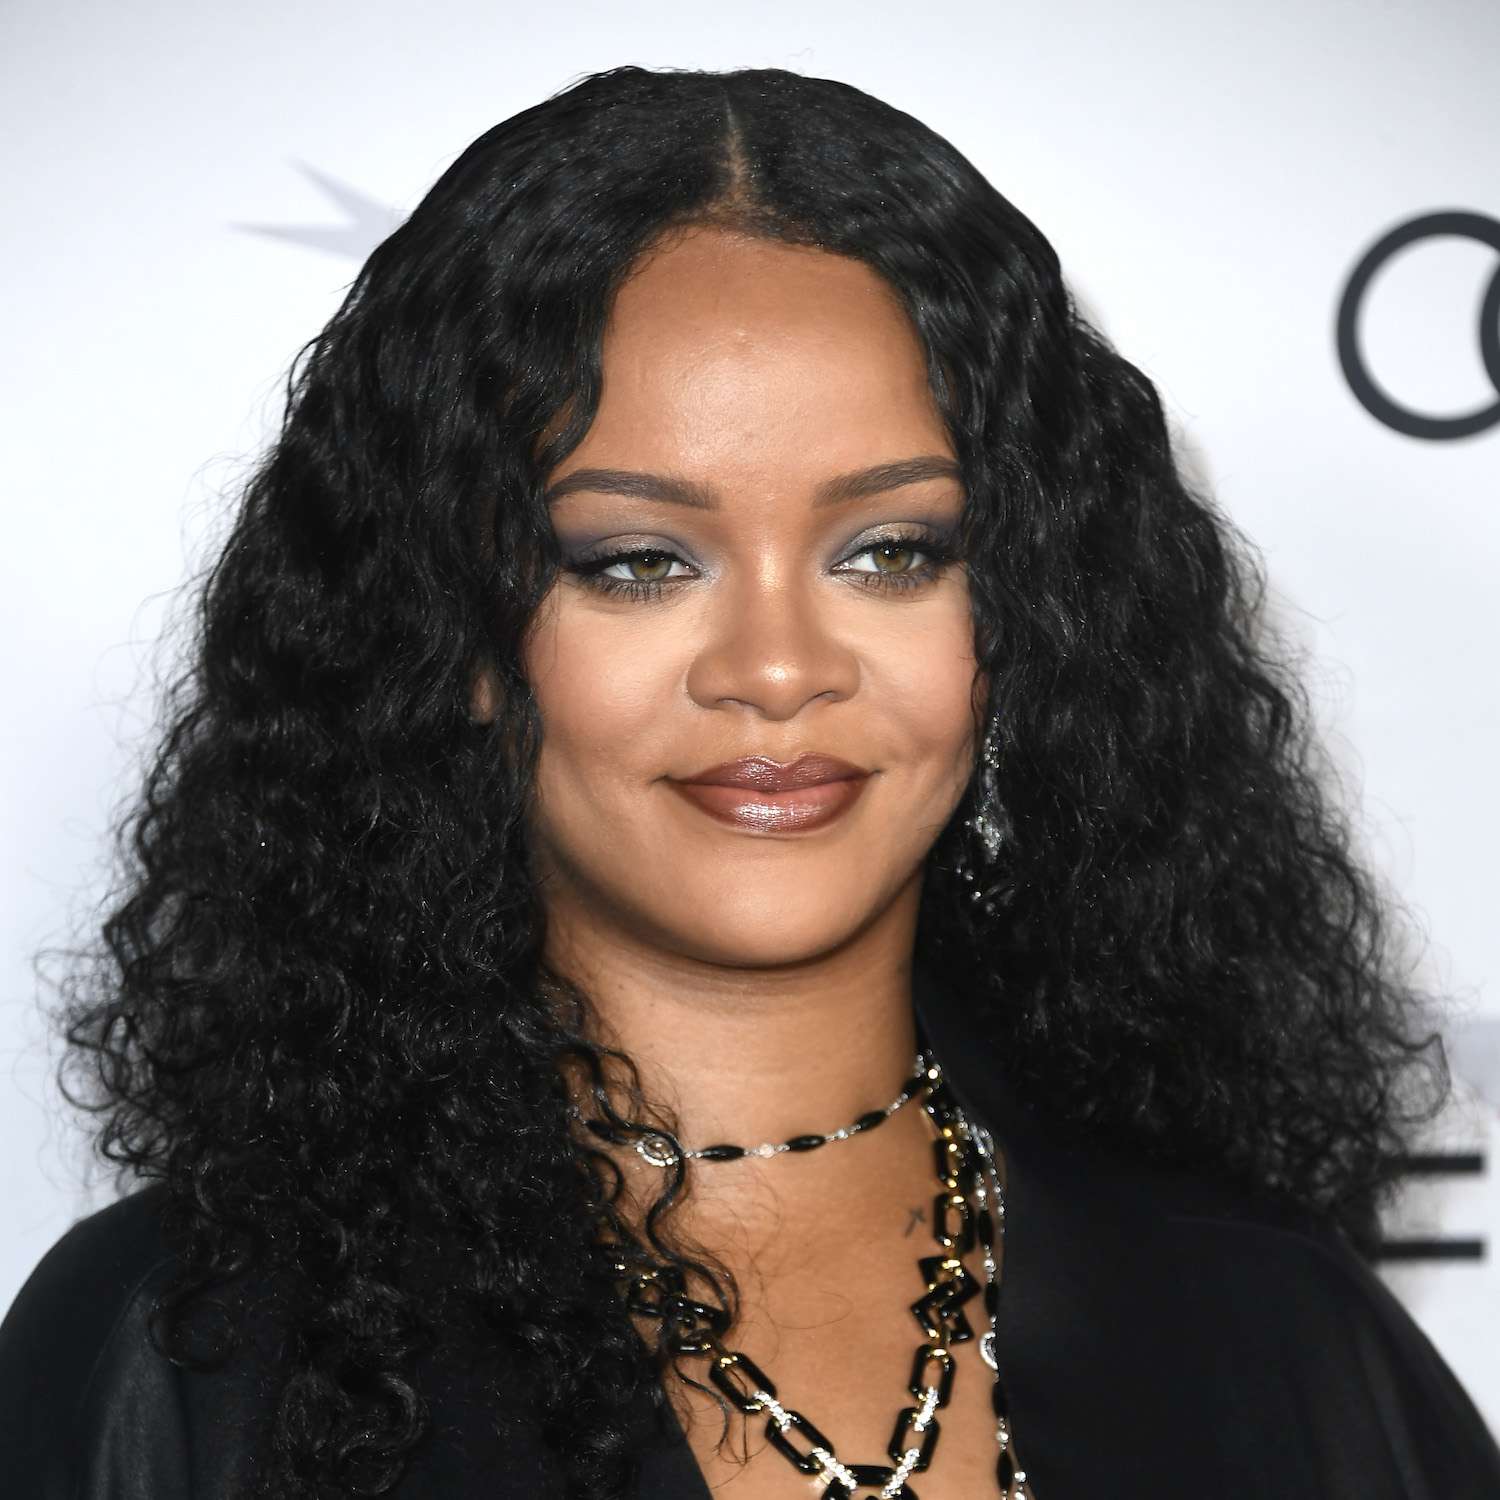 Rihanna wears a long, tousled curly hairstyle with subtle face-framing layers